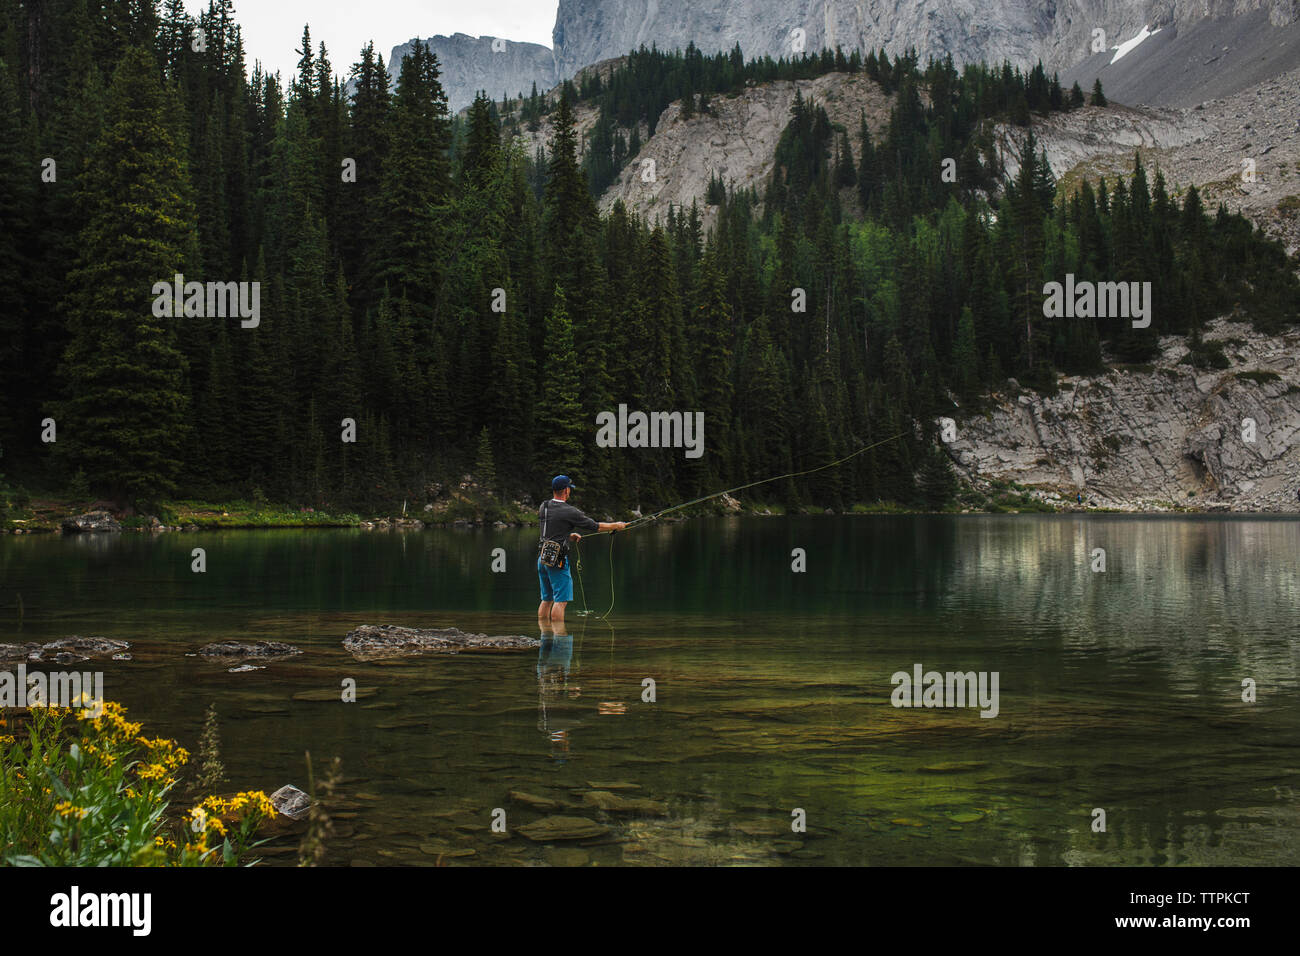 Hiker casting fishing line in lake against mountains at forest Stock Photo